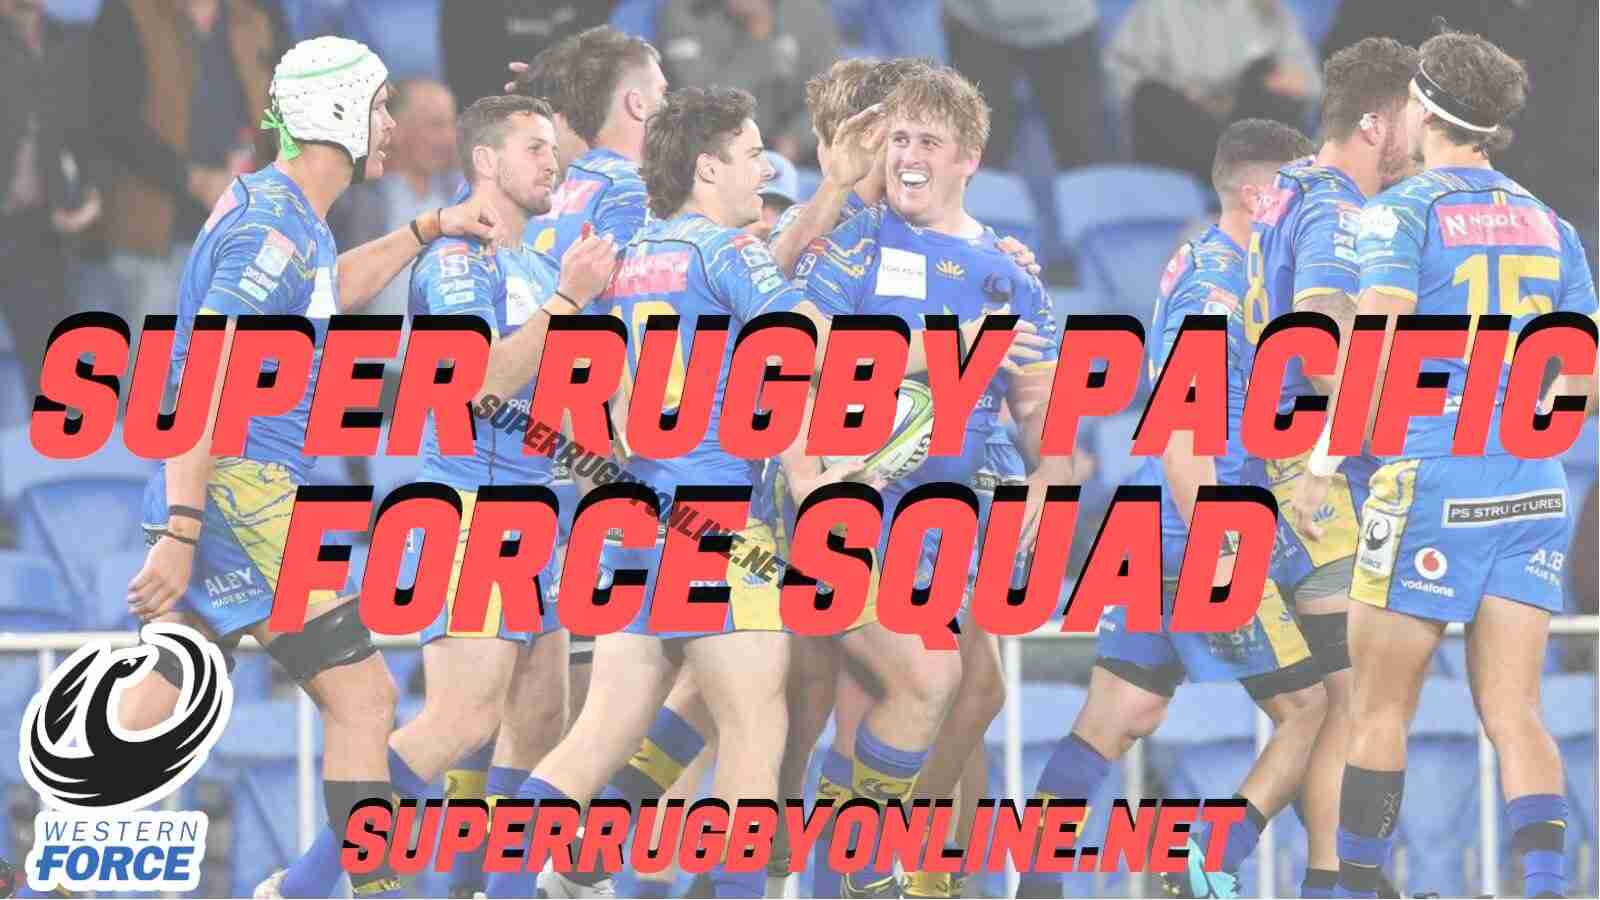 Western Force Squad Super Rugby Pacific